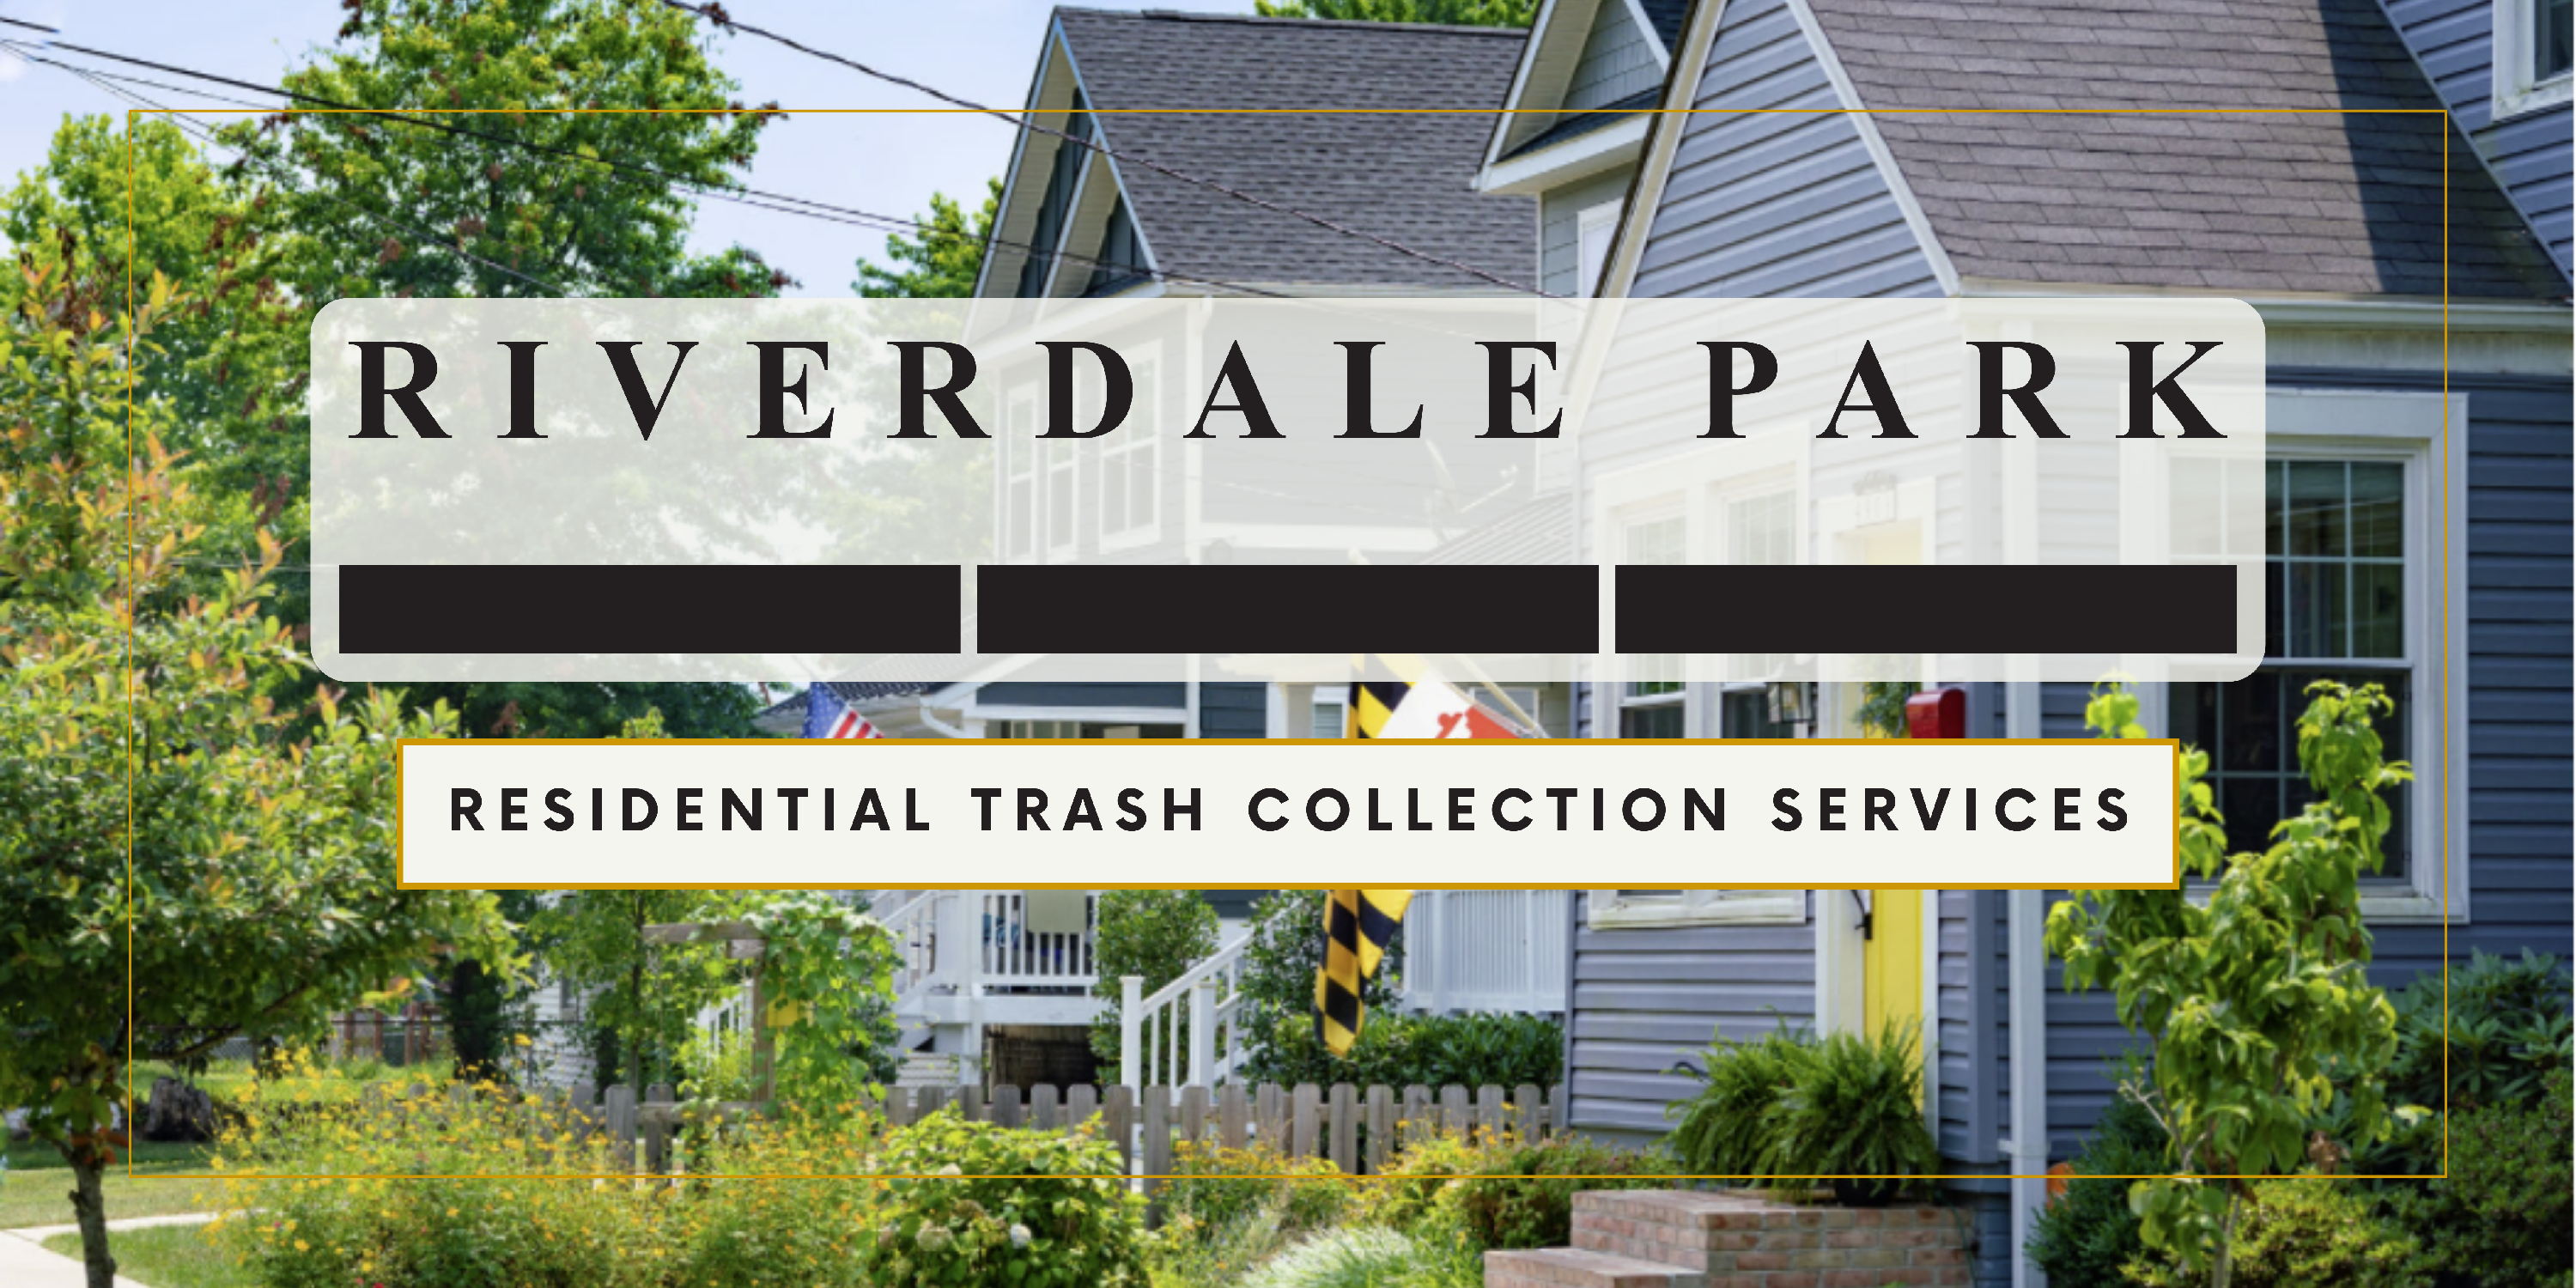 Riverdale park residential trash collections